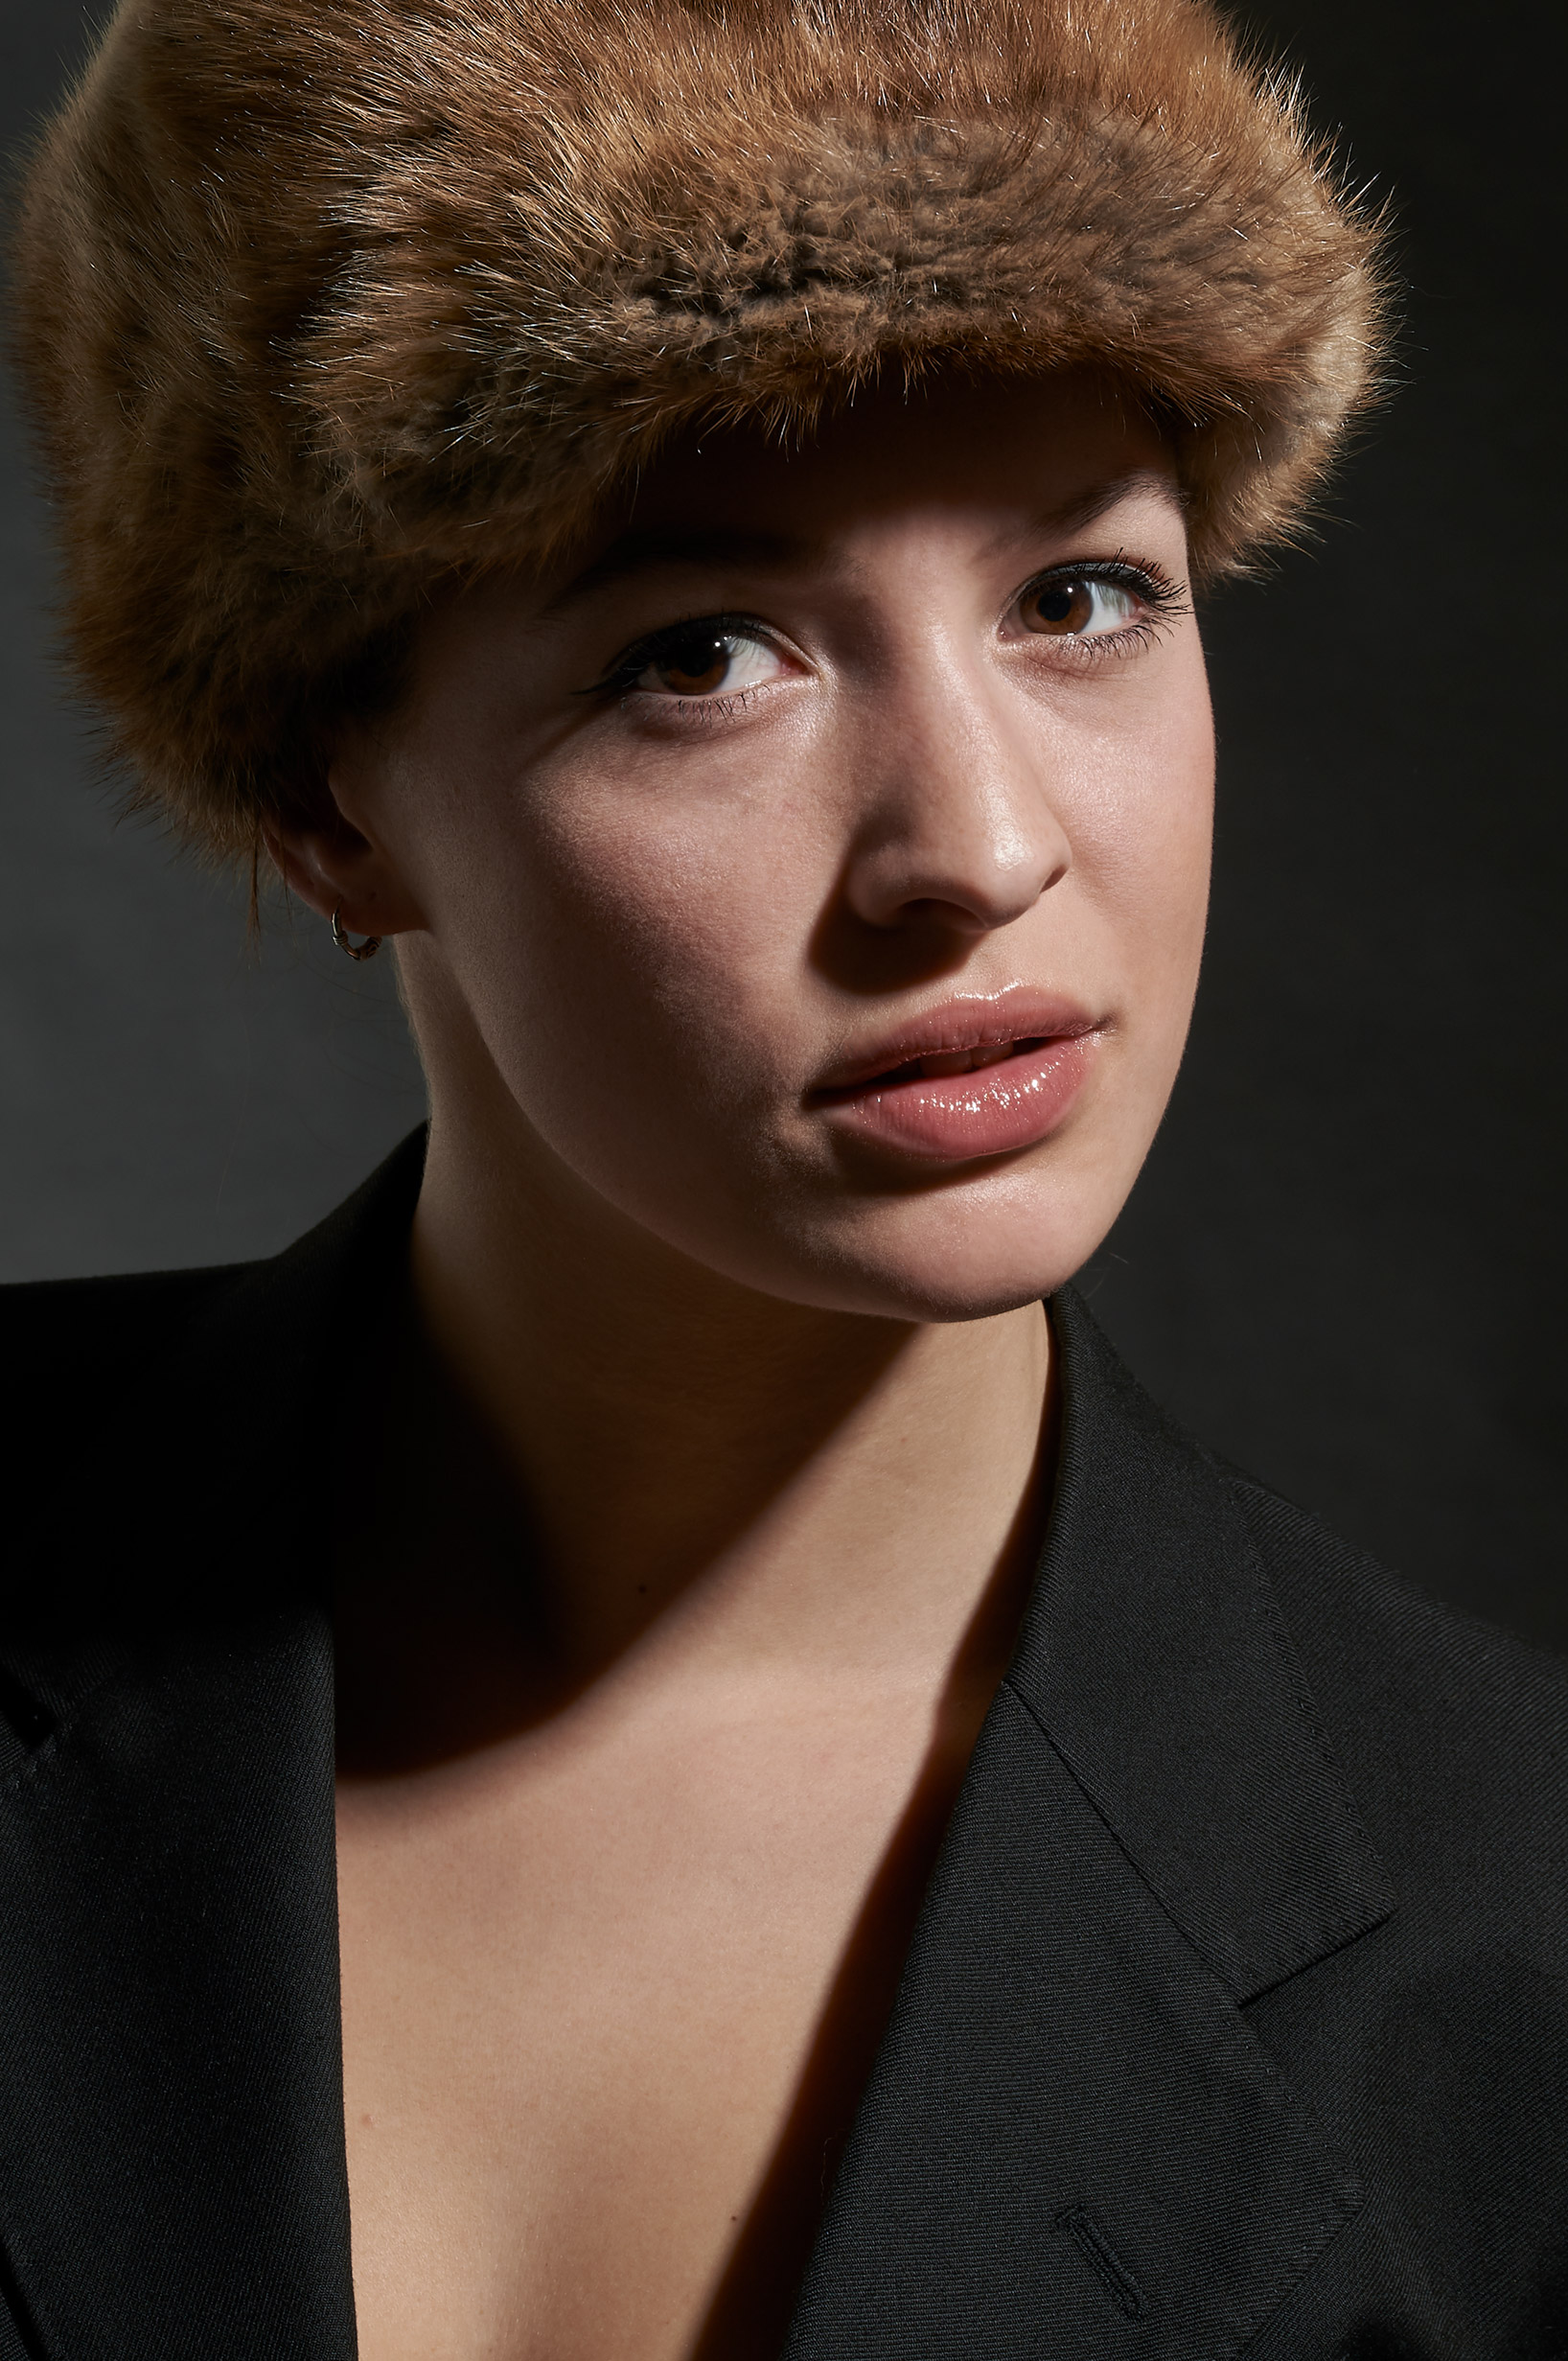 A girl with a winter hat poses for a dramatic portrait wearing a black suit jacket and a brown fur hat